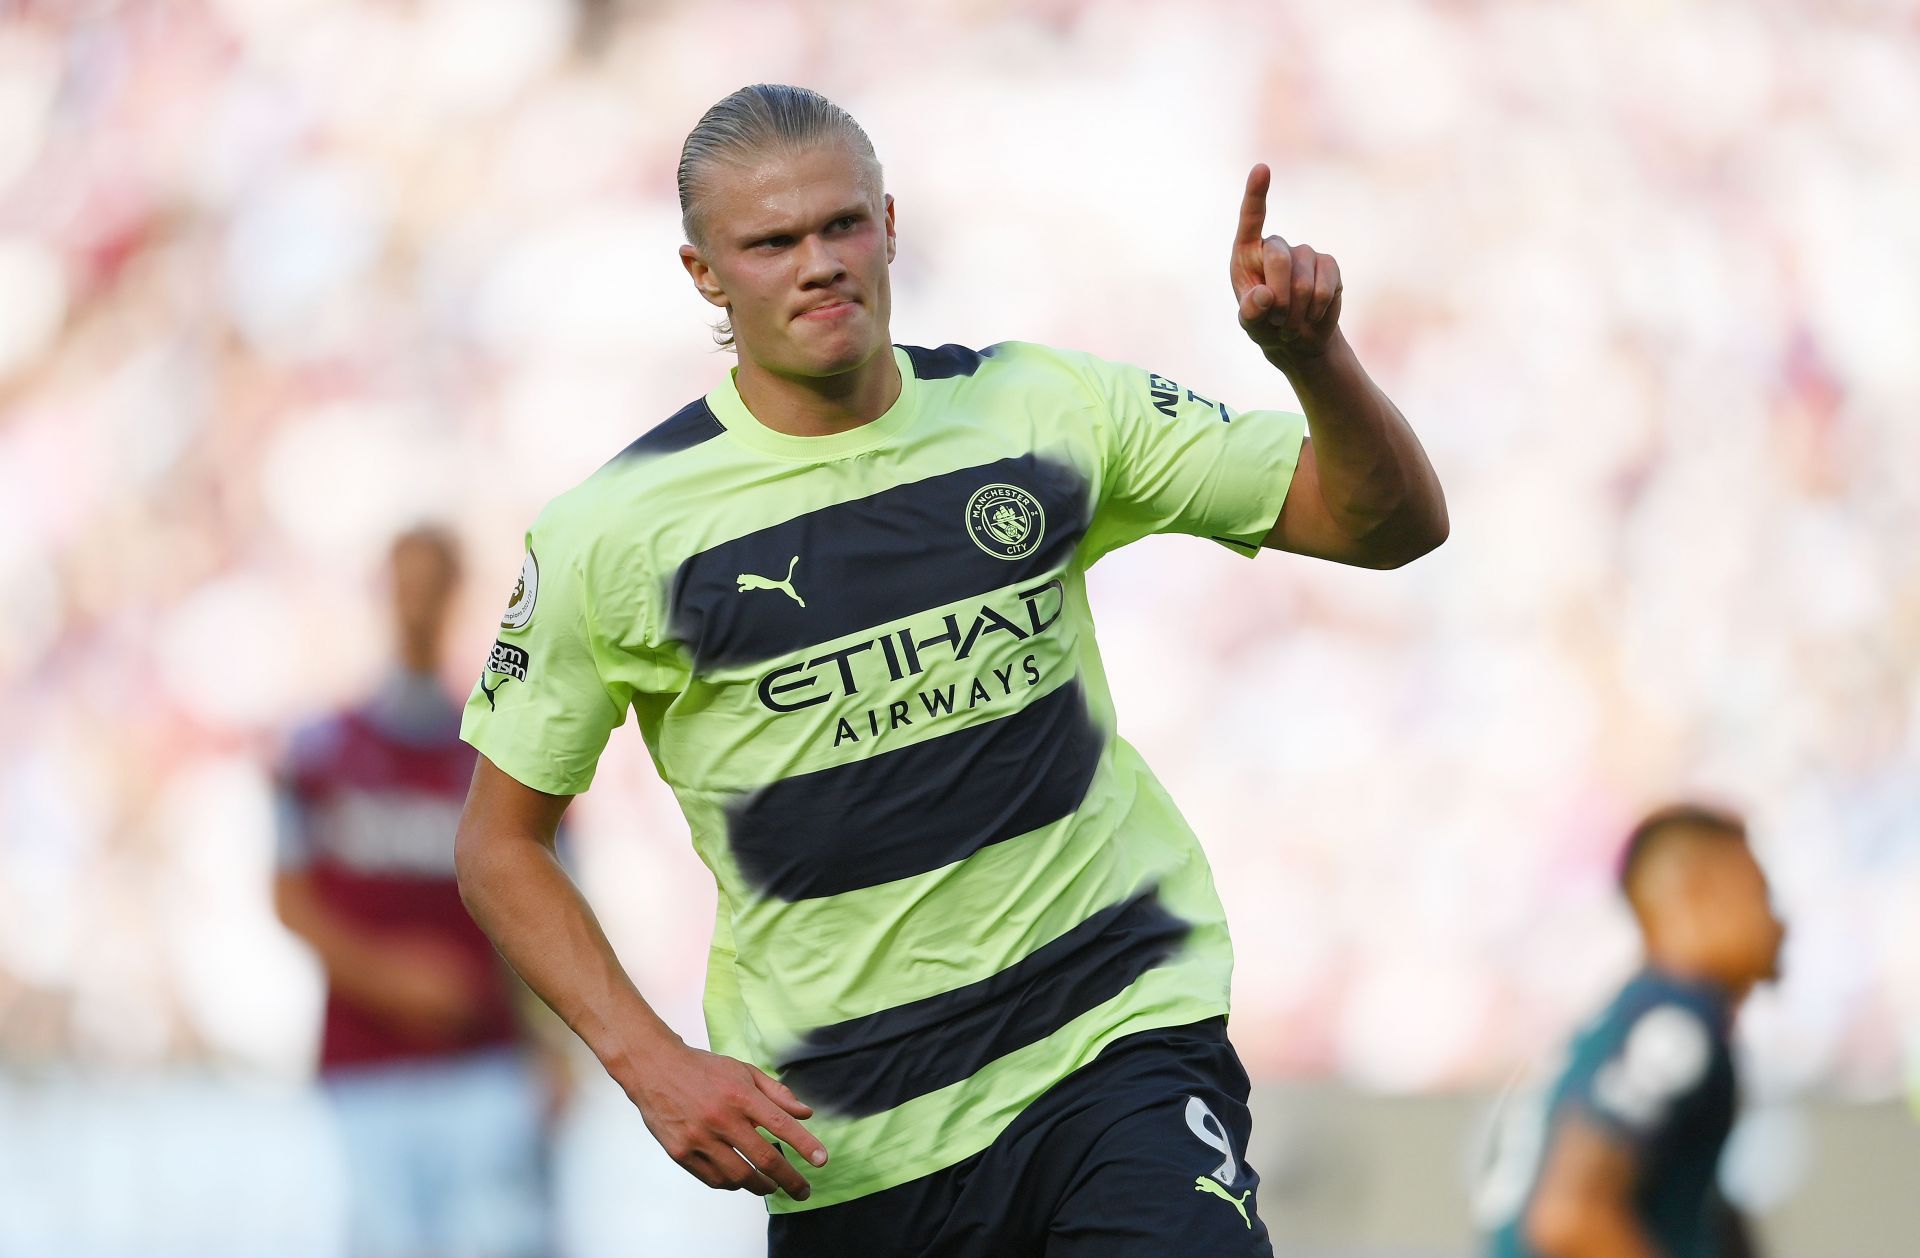 Haaland celebrating his goal for Manchester City against West Ham United